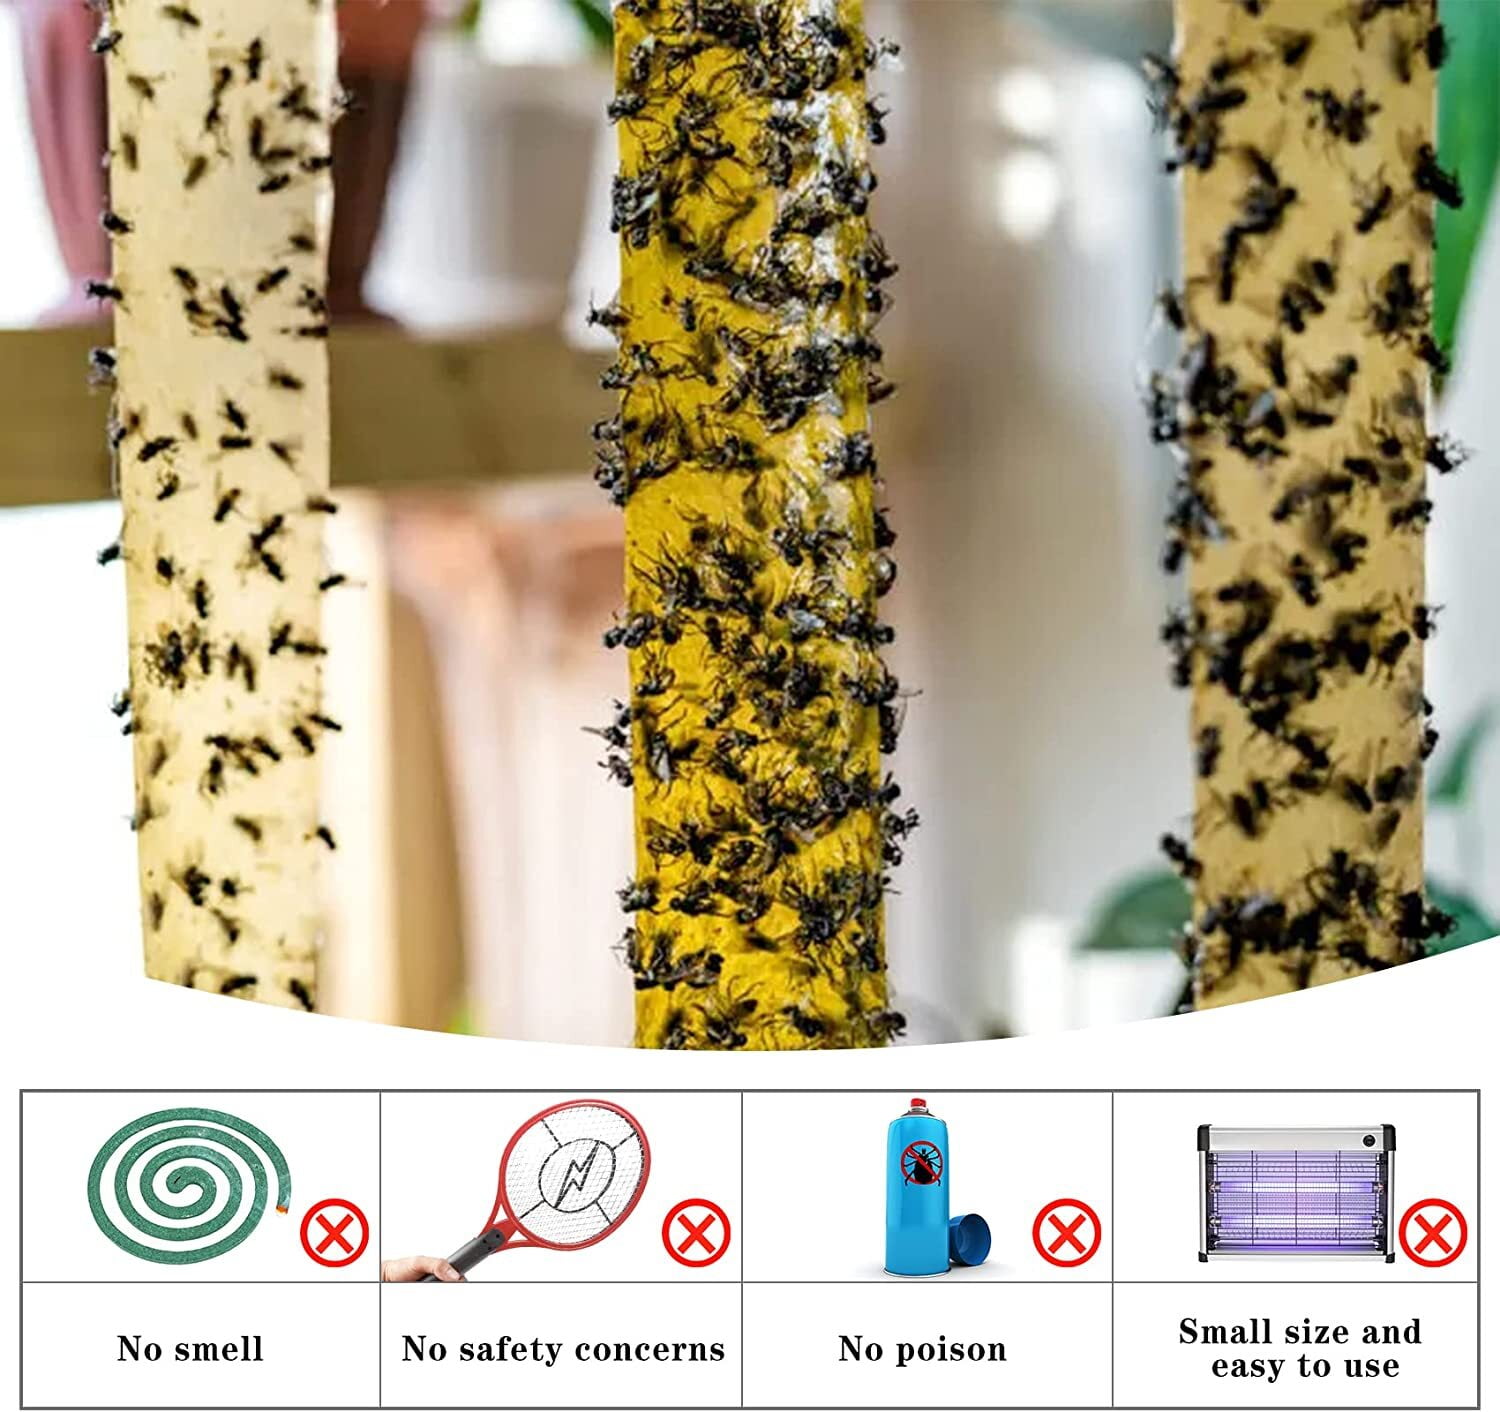 Giant Sticky Fly Trap Roll — MAX Strength — Outdoor / Indoor — Non